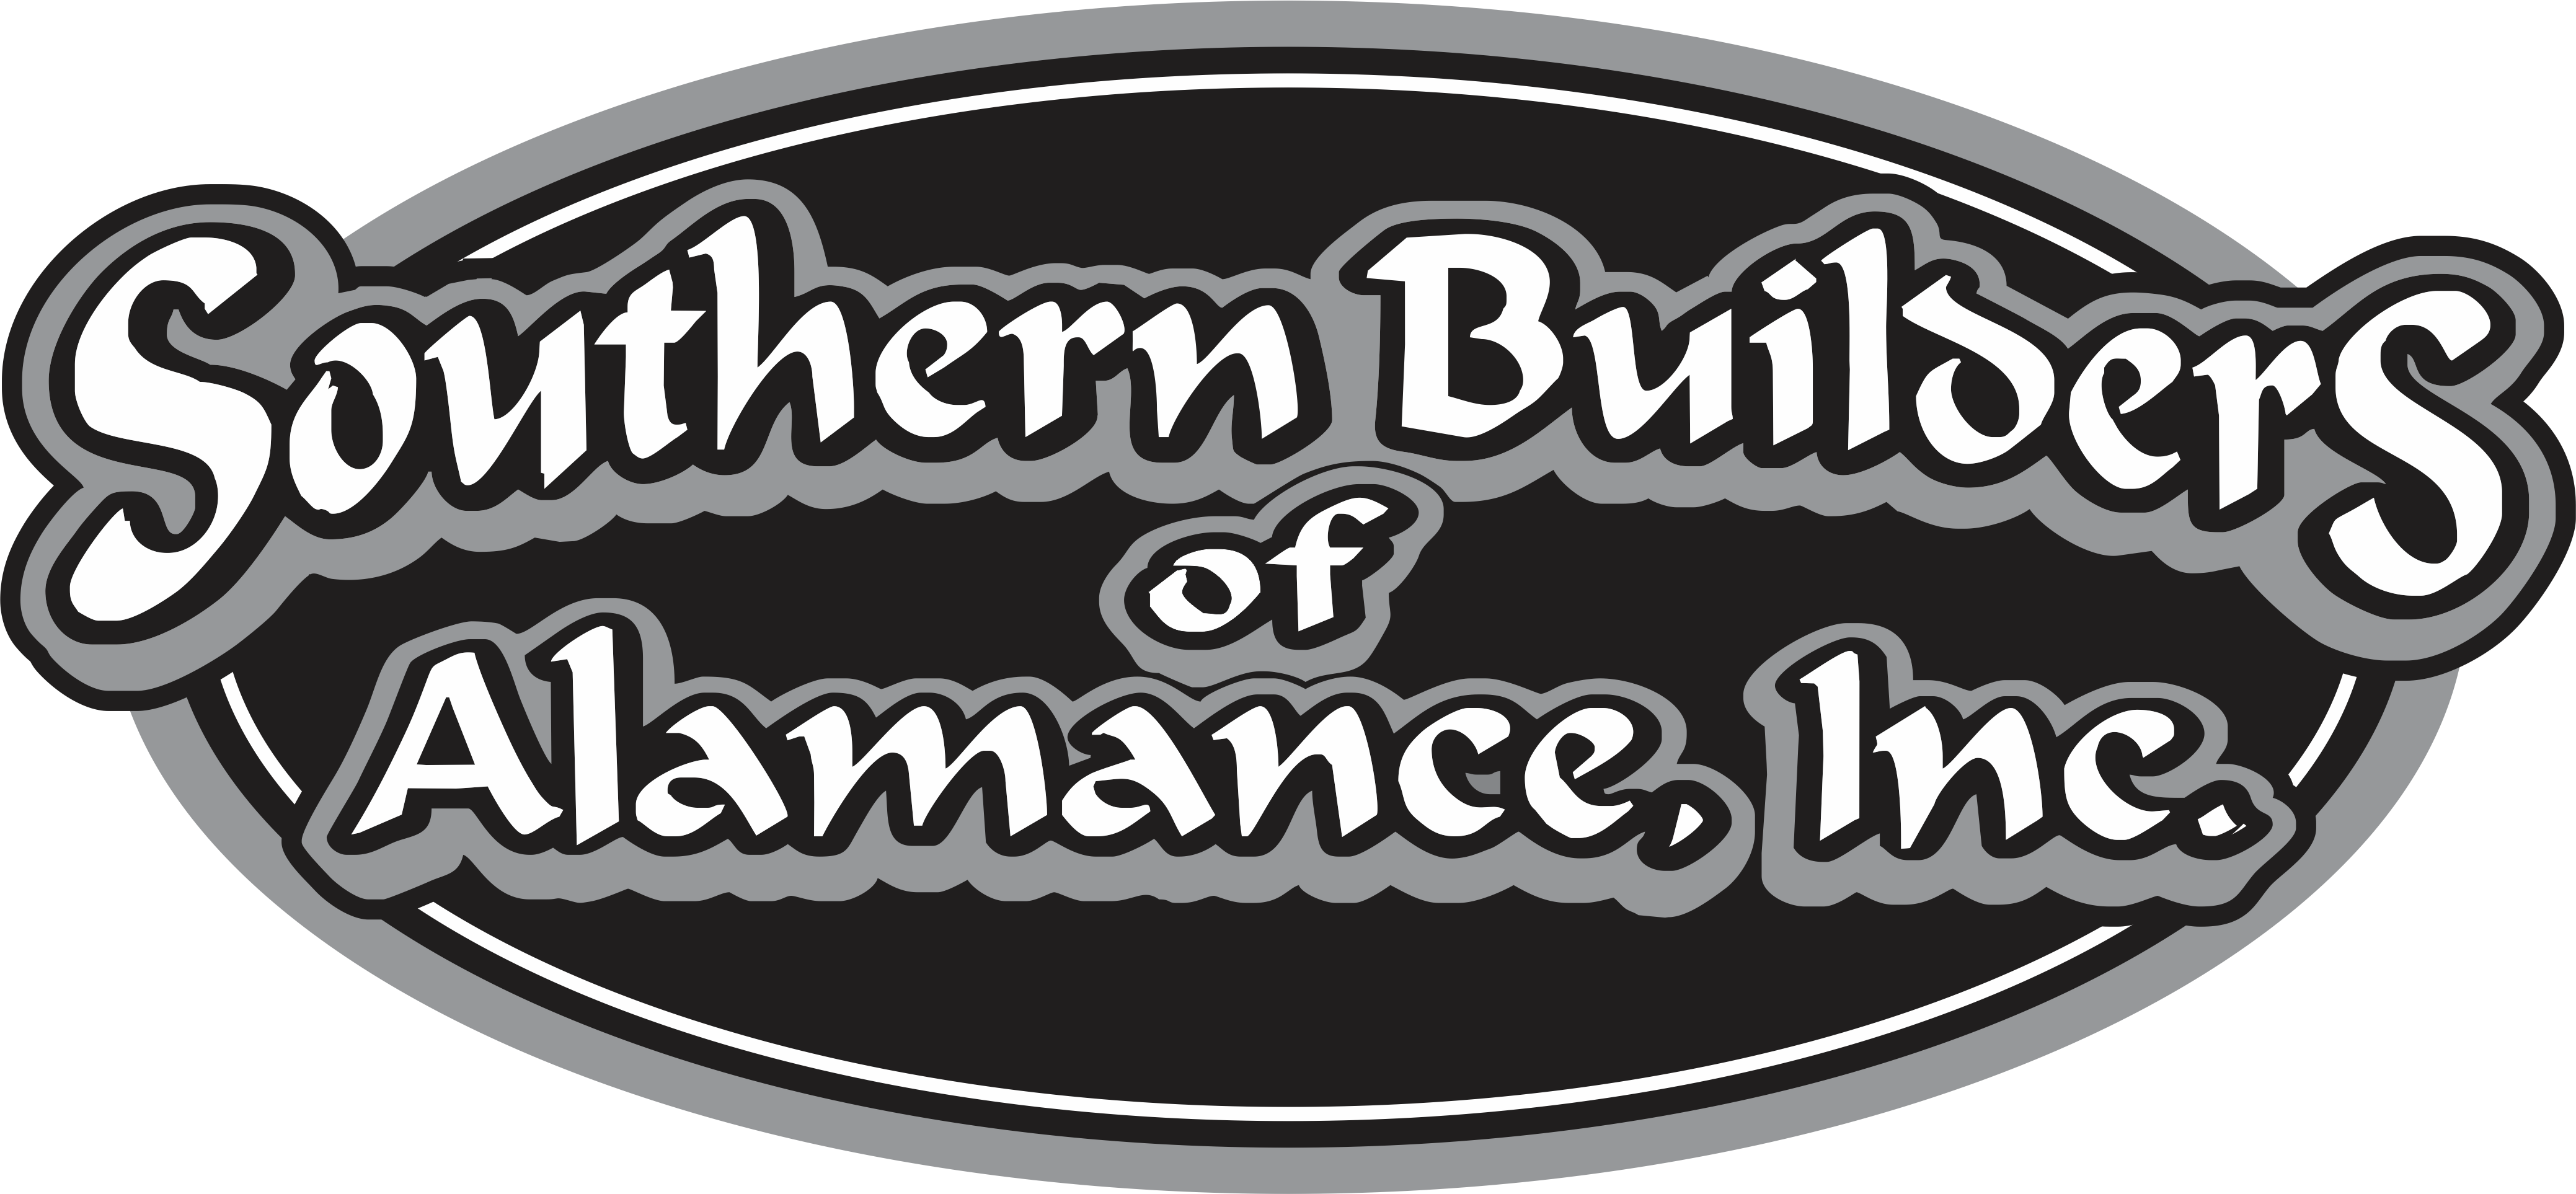 Southern Builders of Alamance Logo